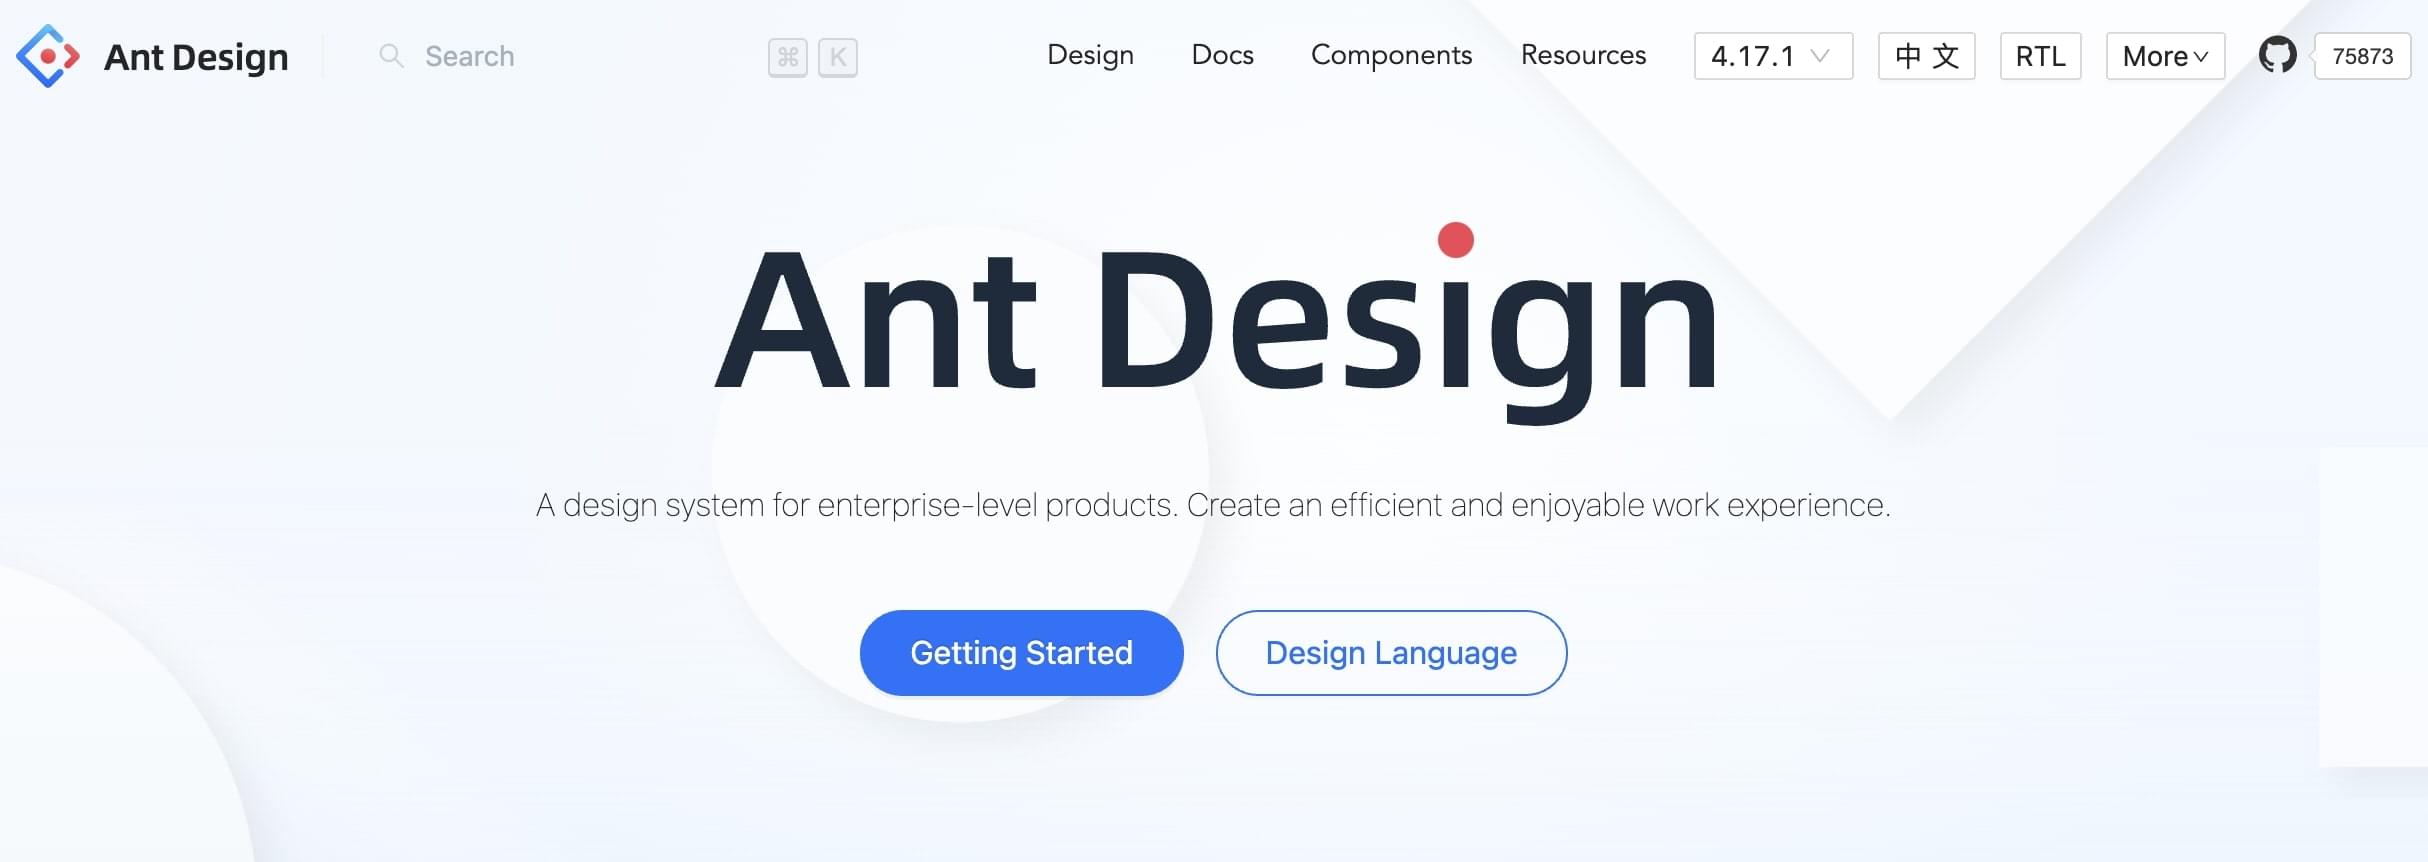 16382607743-Ant-Design-React-component-library.jpg